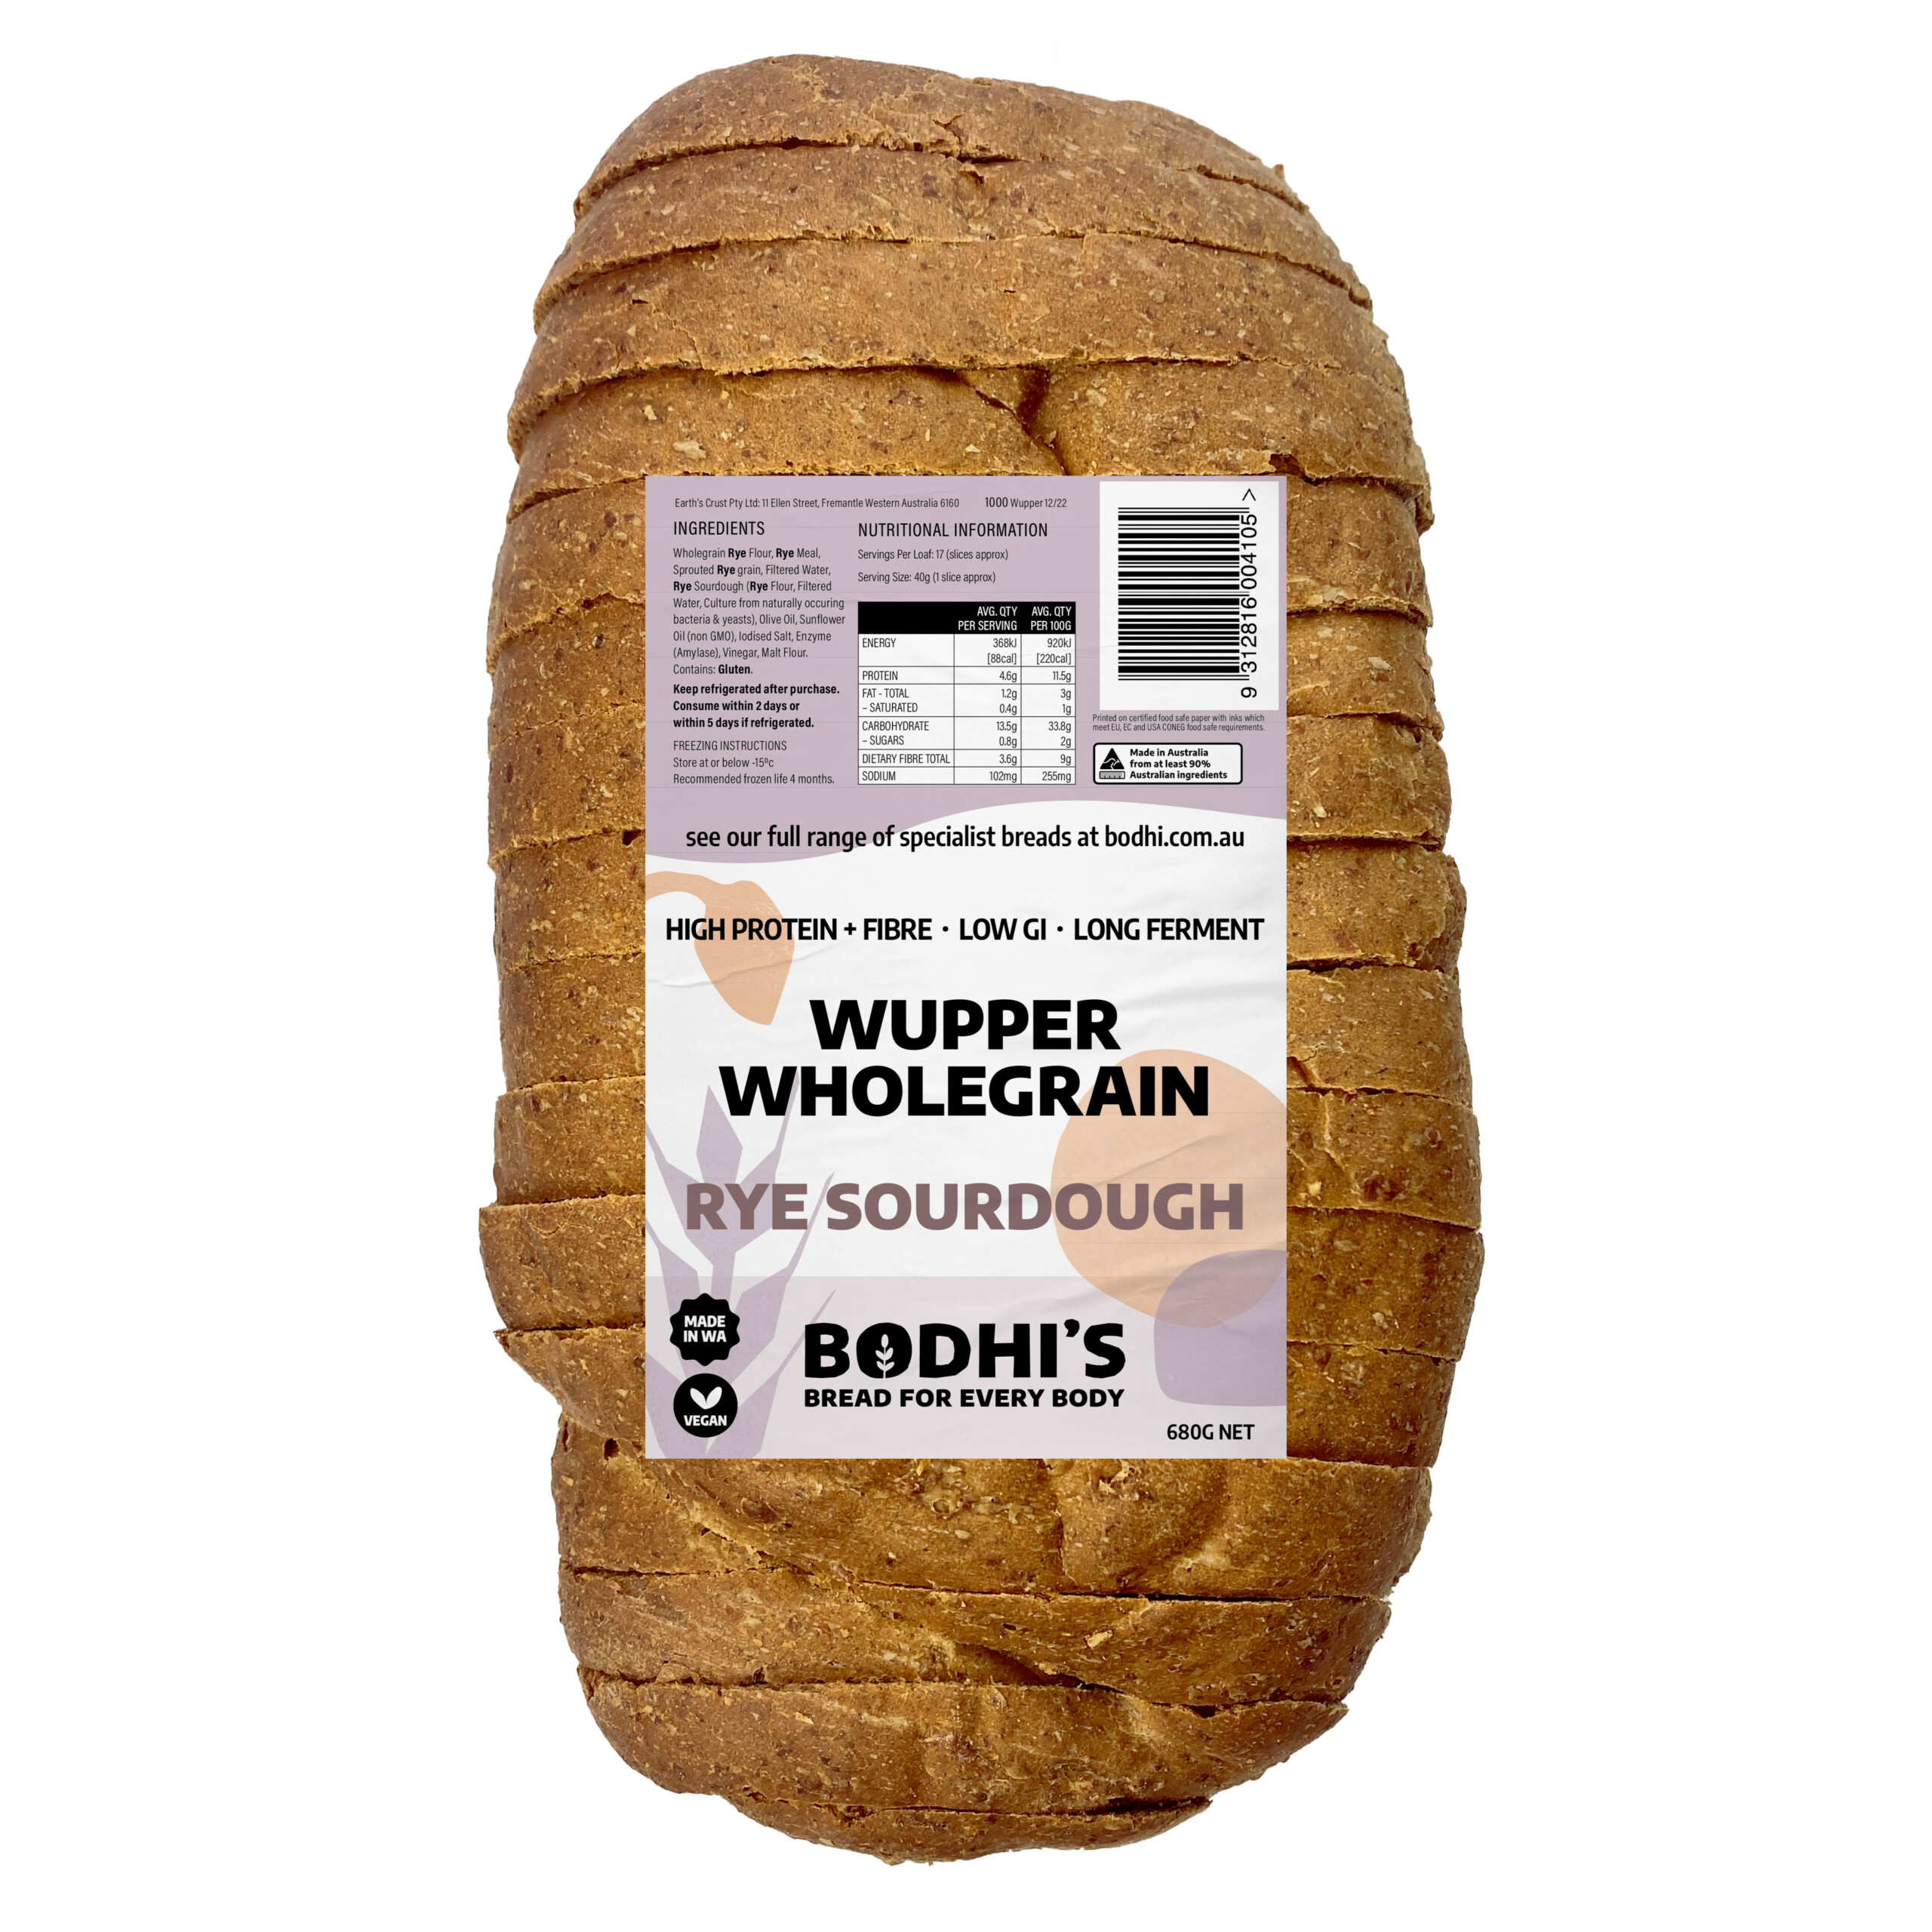 A photo of Bodhi's Wupper Wholegrain Rye Sourdough Bread with a label